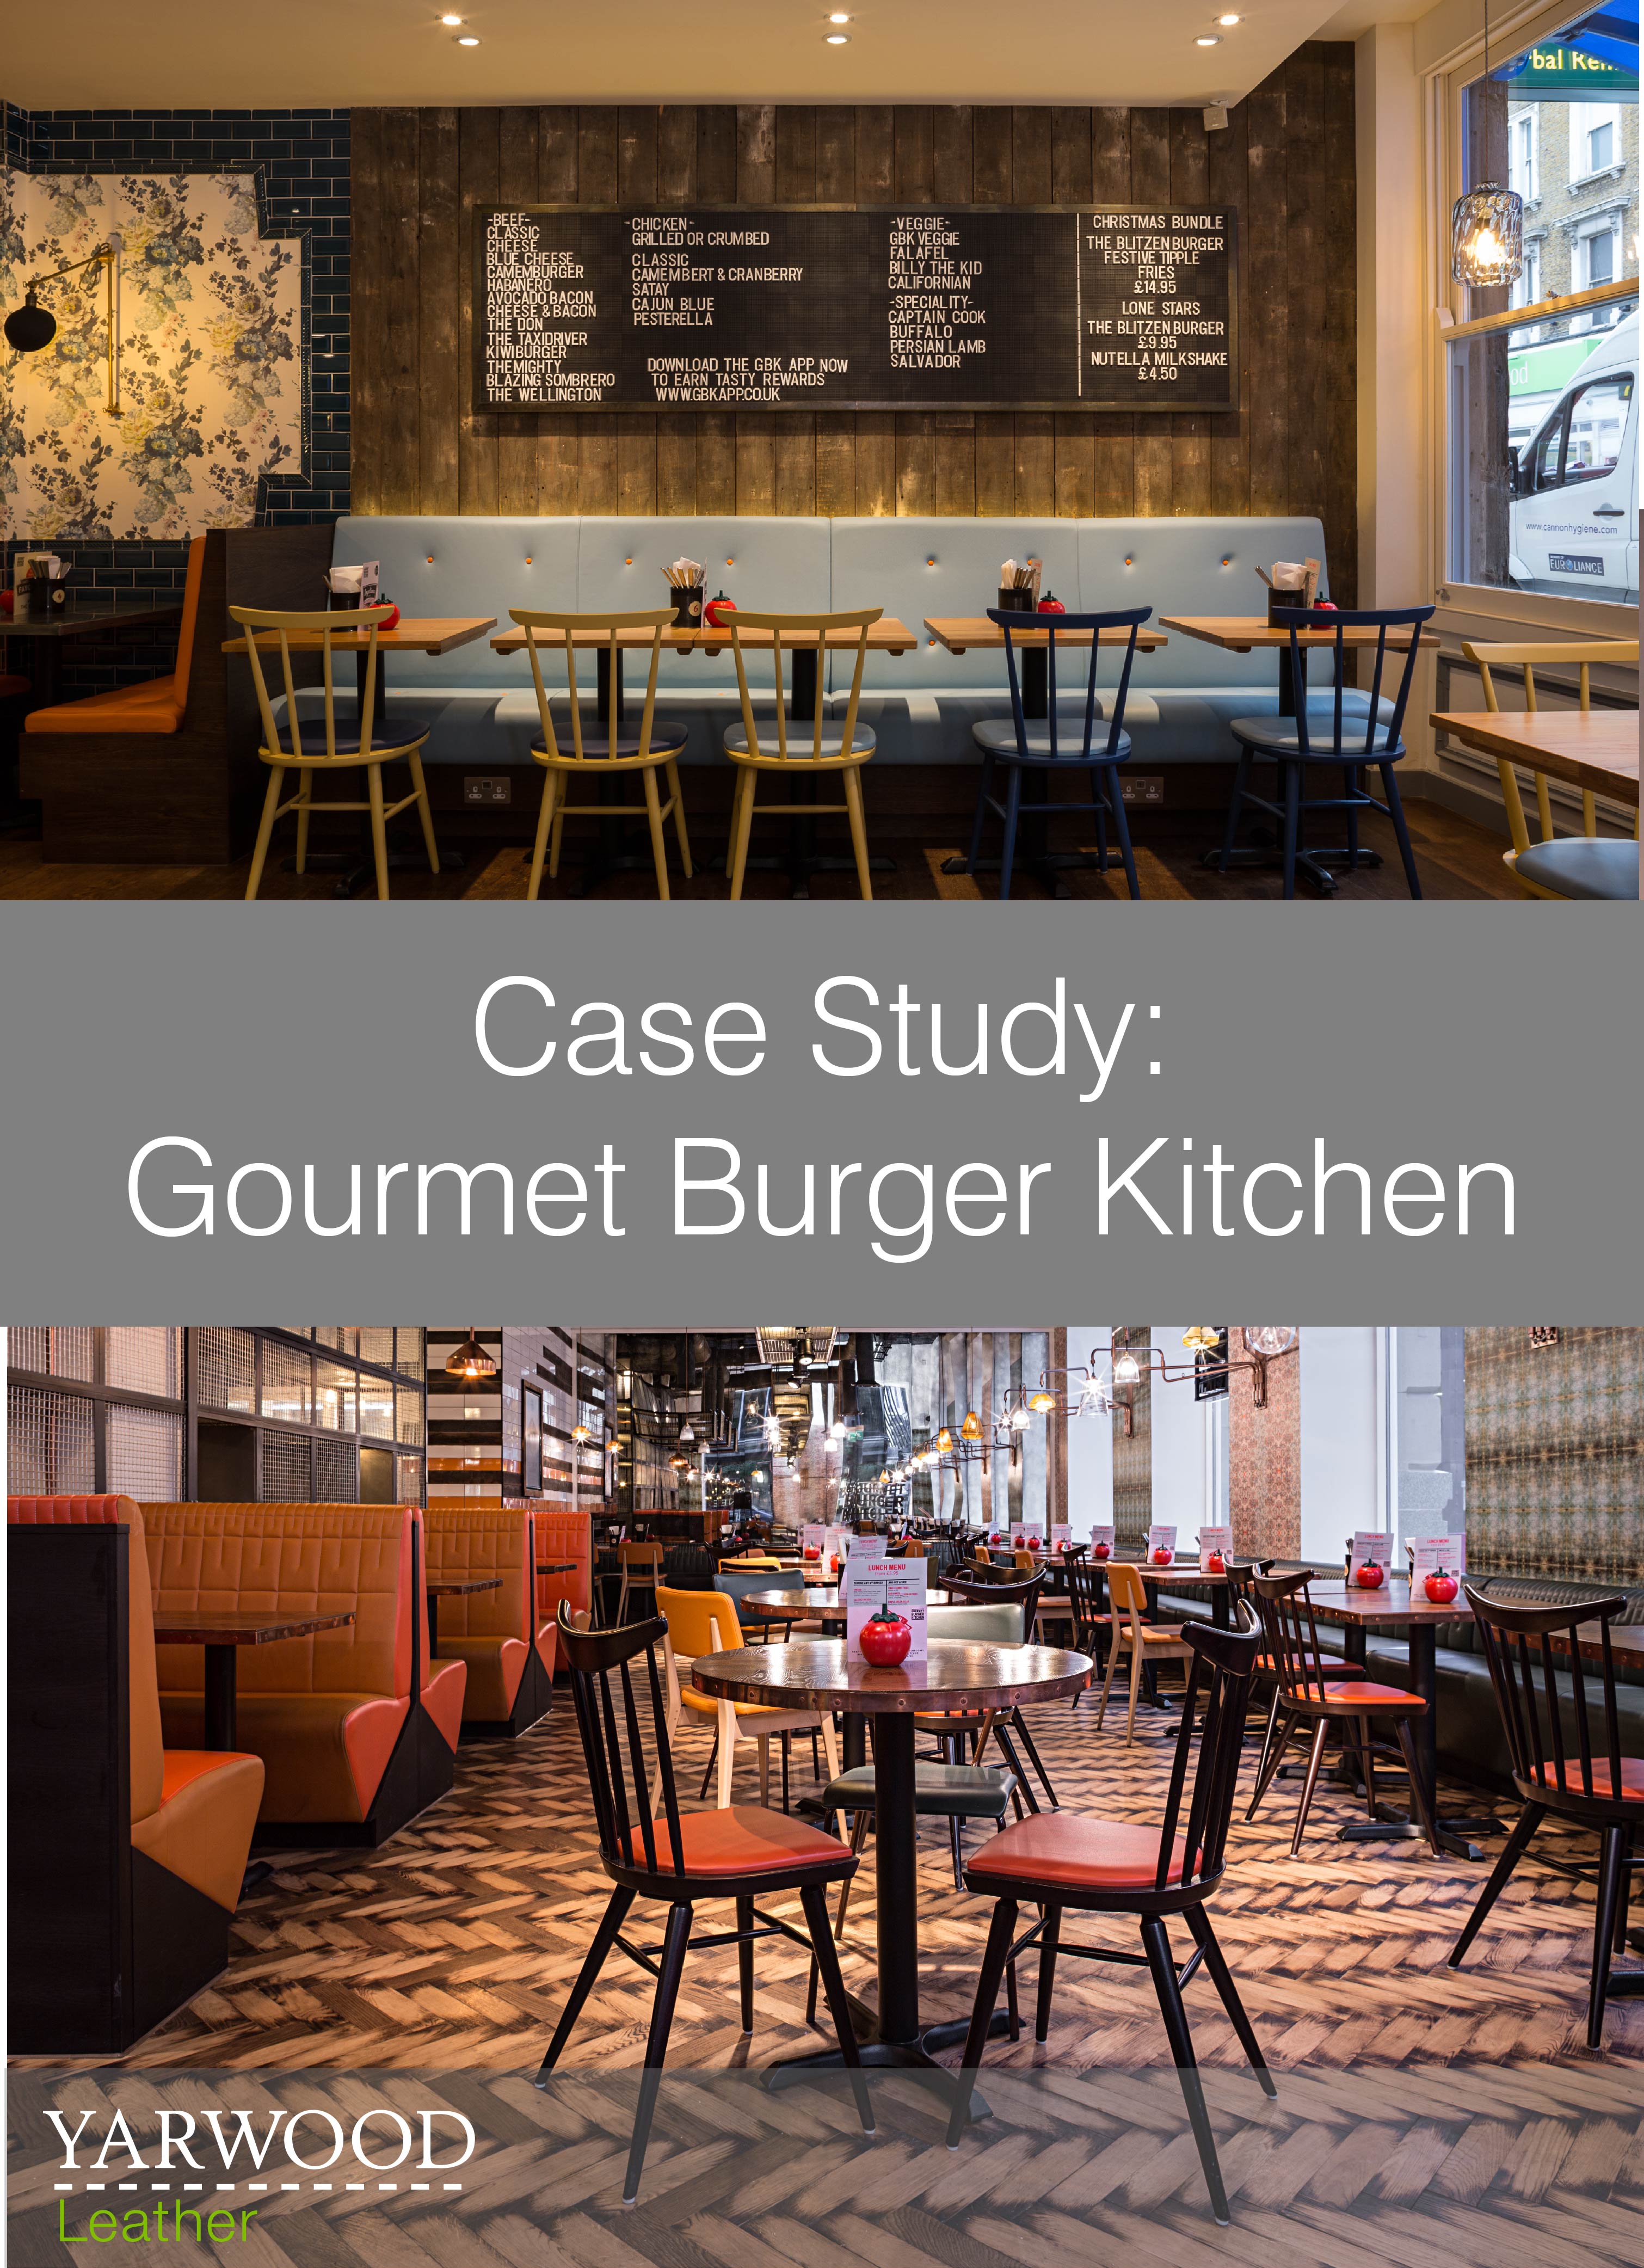 Enjoy great burgers on great leather! Read about two Gourmet Burger Kitchen restaurants and their design